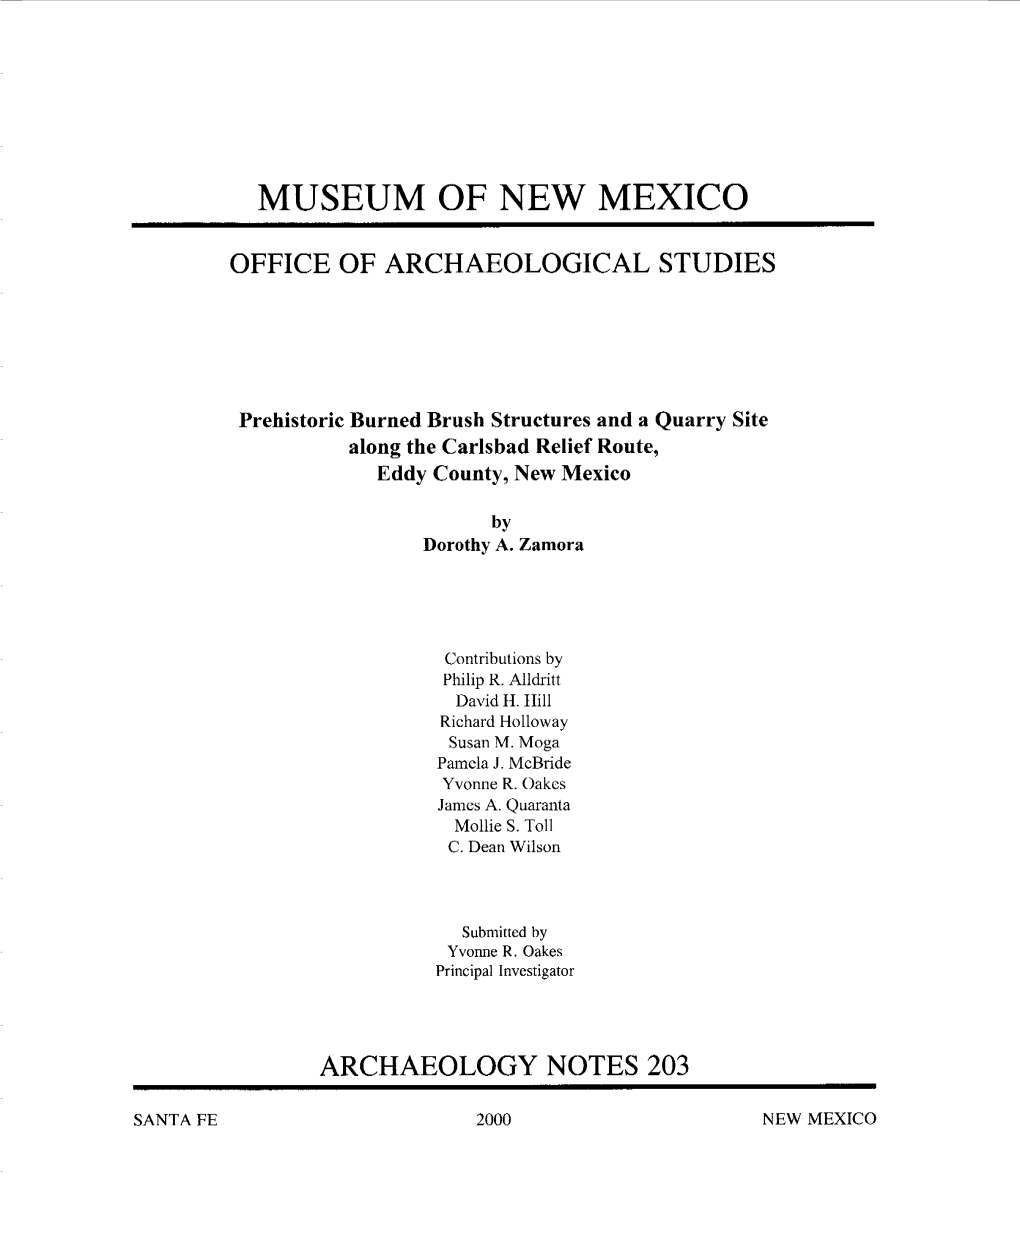 Museum of New Mexico